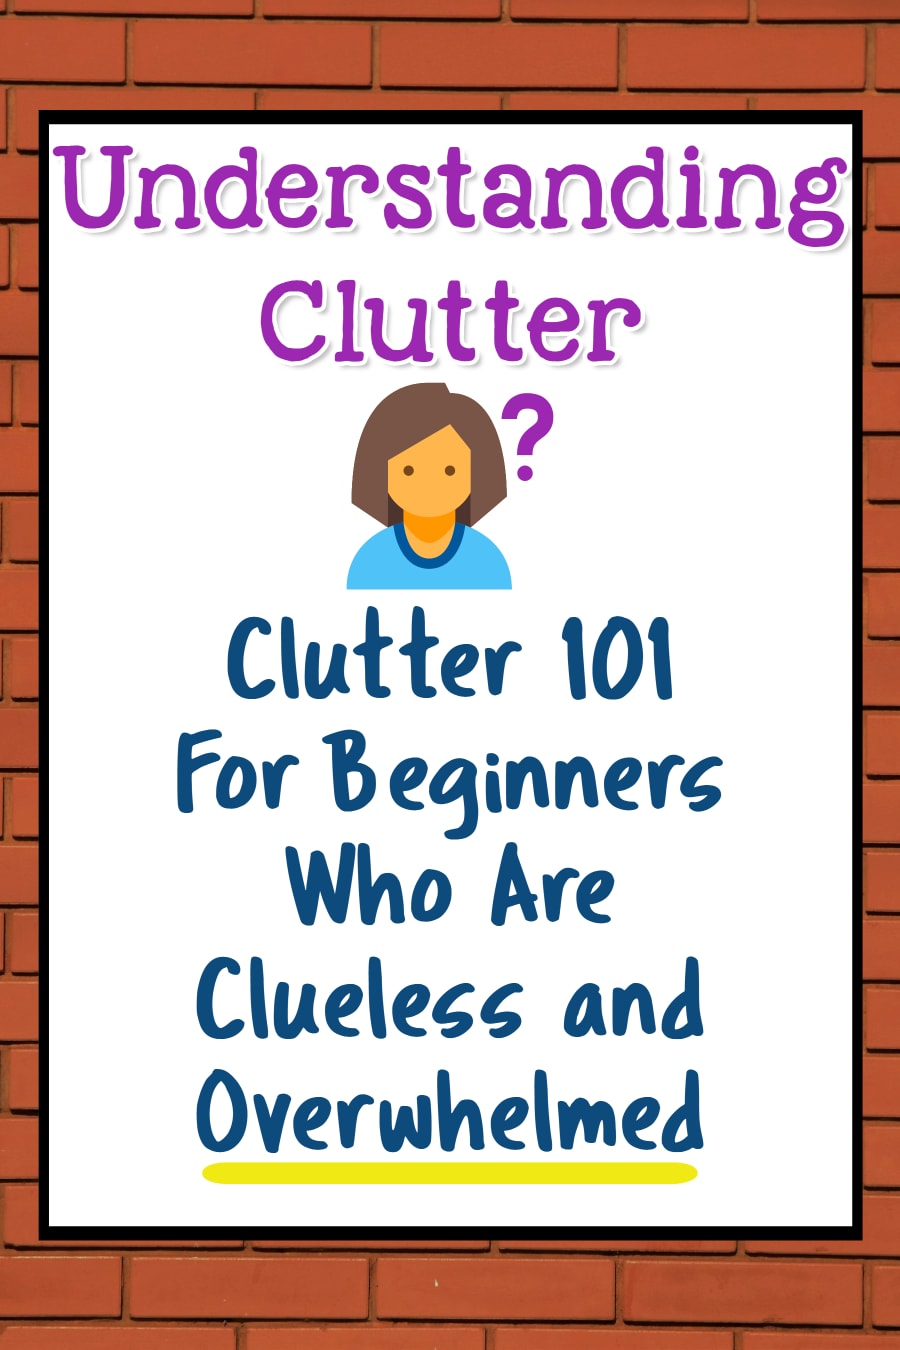 Decluttering 101: Understanding Clutter - Ready to declutter your home but feeling overwhelmed?  Get useful decluttering ideas to declutter and organize your home from start to finish and make sure you're not making these decluttering mistakes.  Step 1 of our Decluttering club Declutter Challenge - Understanding Clutter